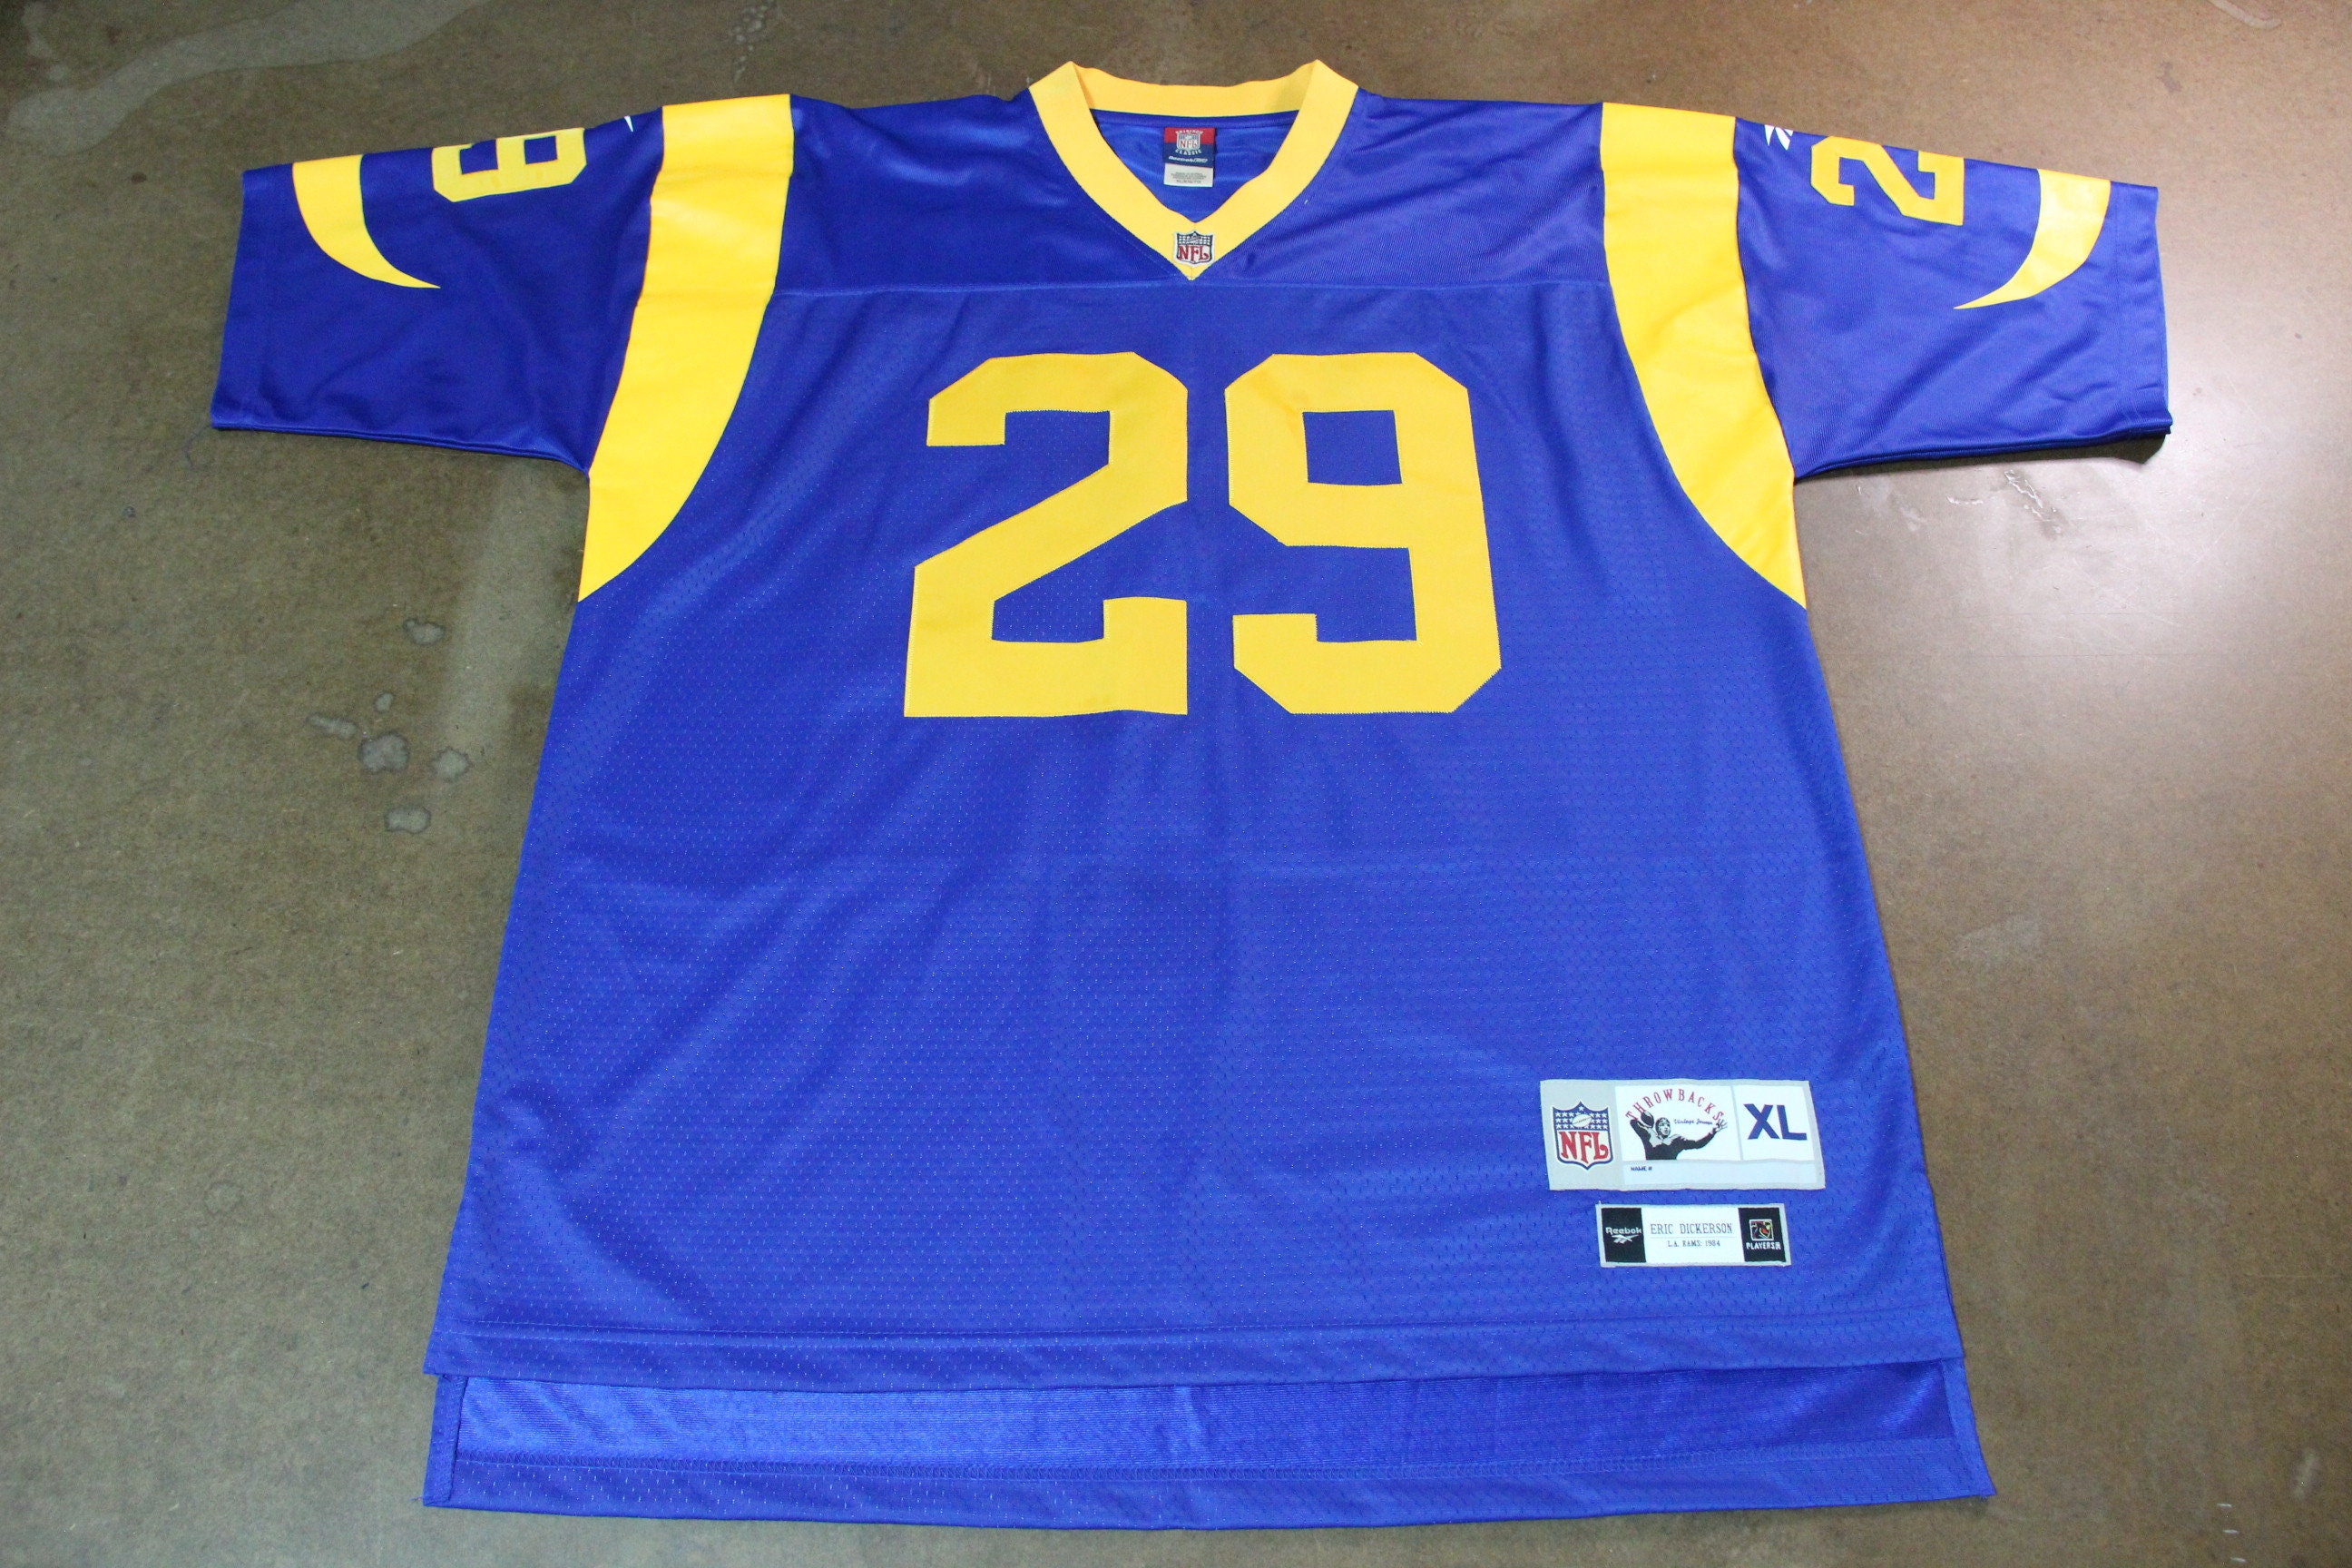 LegacyVintage99 Vintage Los Angeles Rams Jersey Sand Knit Made USA Size Large L NFL Football California St Louis 1980s 80s